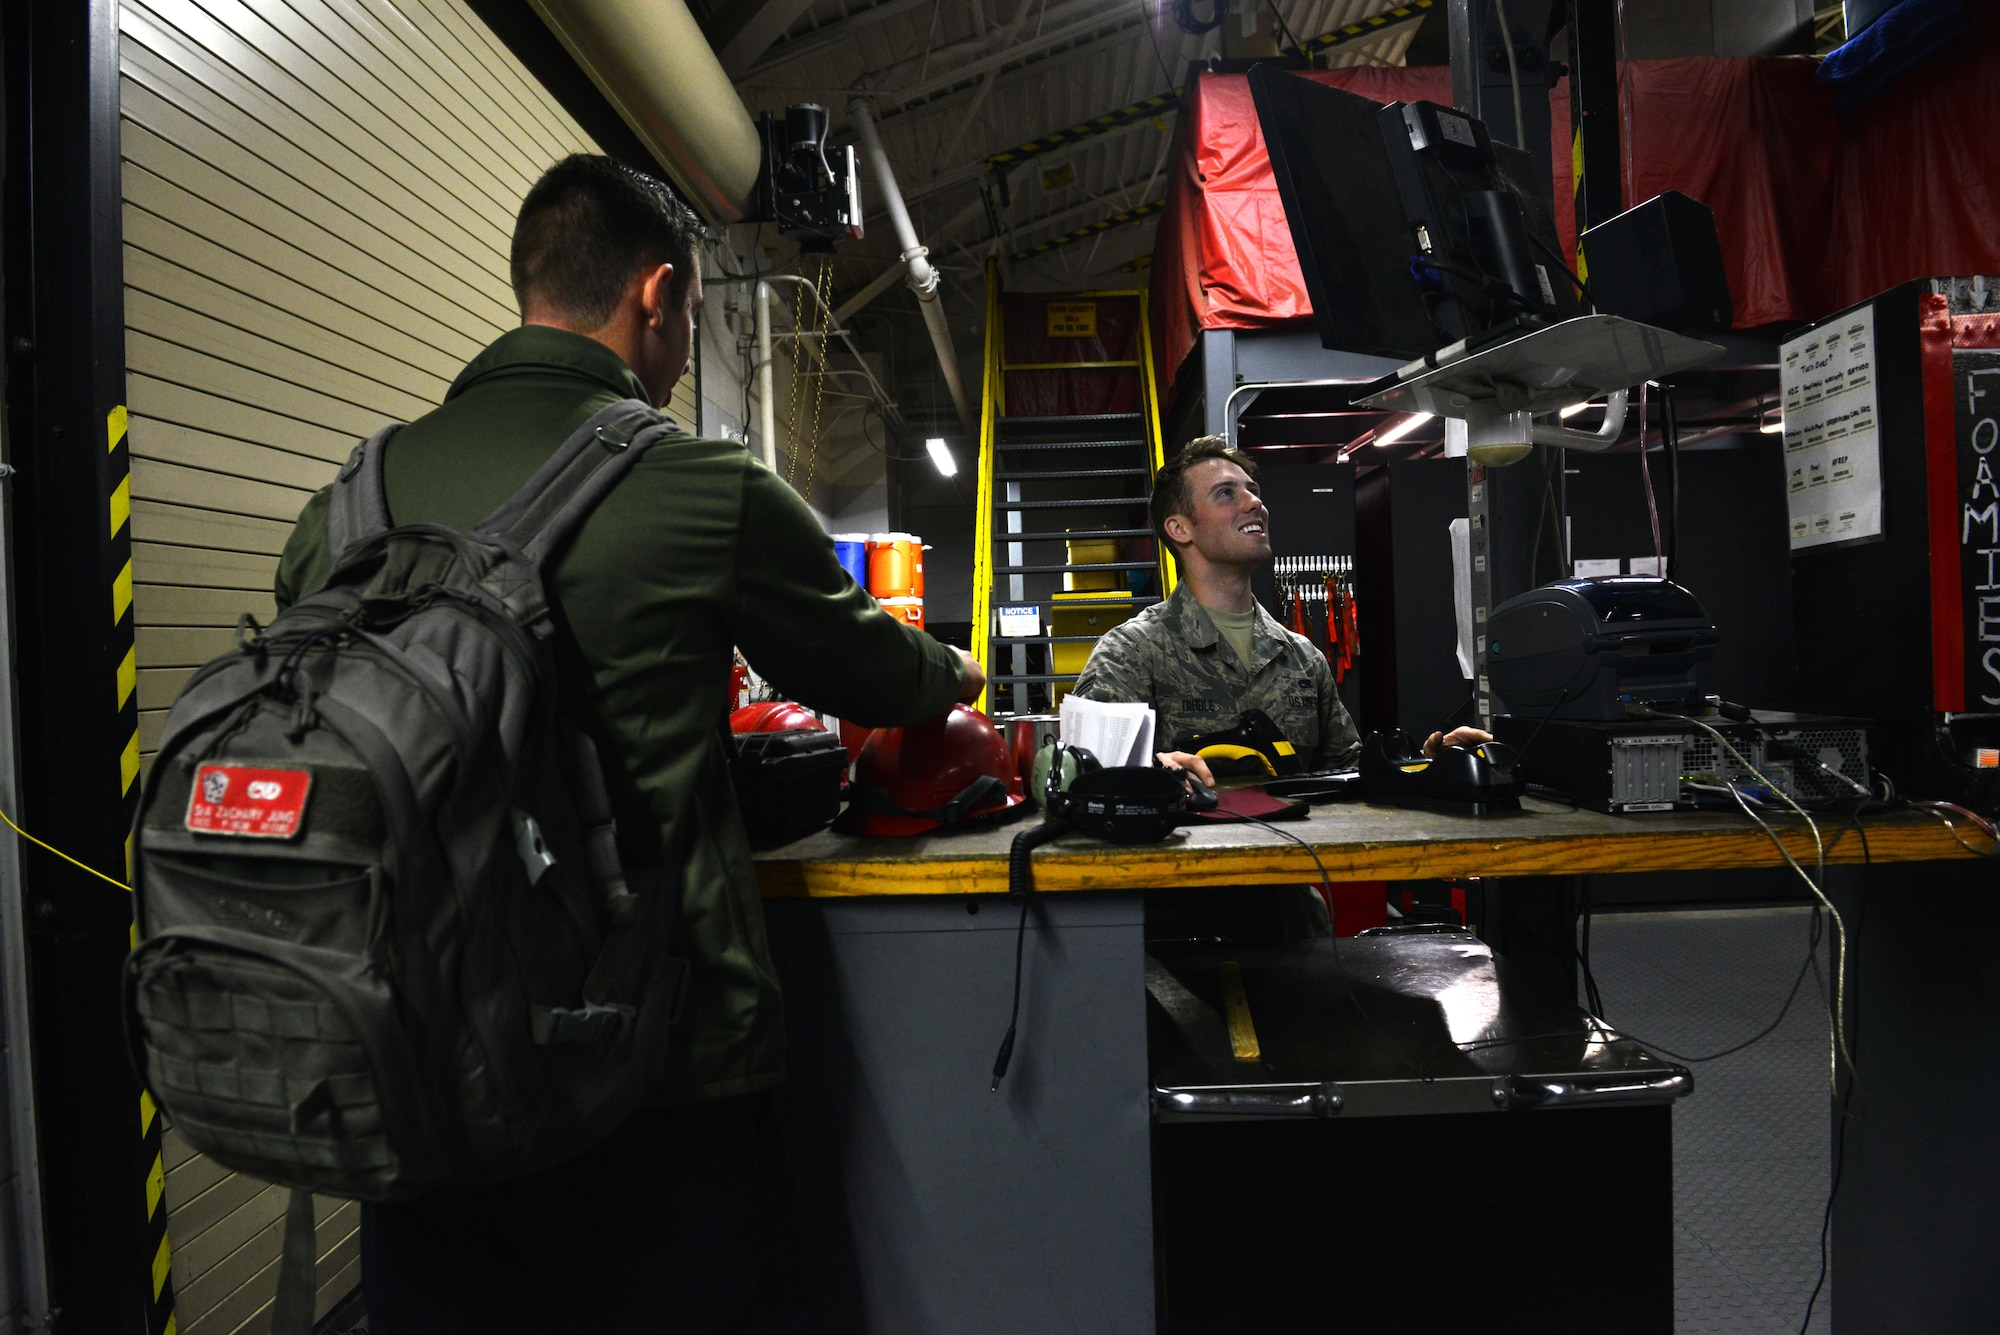 U.S. Air Force Senior Airman Zachary Jung, 20th Aircraft Maintenance Squadron tactical aircraft maintainer, checks out tools from Senior Airman Alexander Dibble, 20th AMXS support technician, at Shaw Air Force Base, S.C., Dec. 14, 2016. Tools are issued and returned at the beginning and end of every shift, inspected each time by both the tactical aircraft maintainers and support technicians. (U.S. Air Force photo by Airman 1st Class Destinee Sweeney)